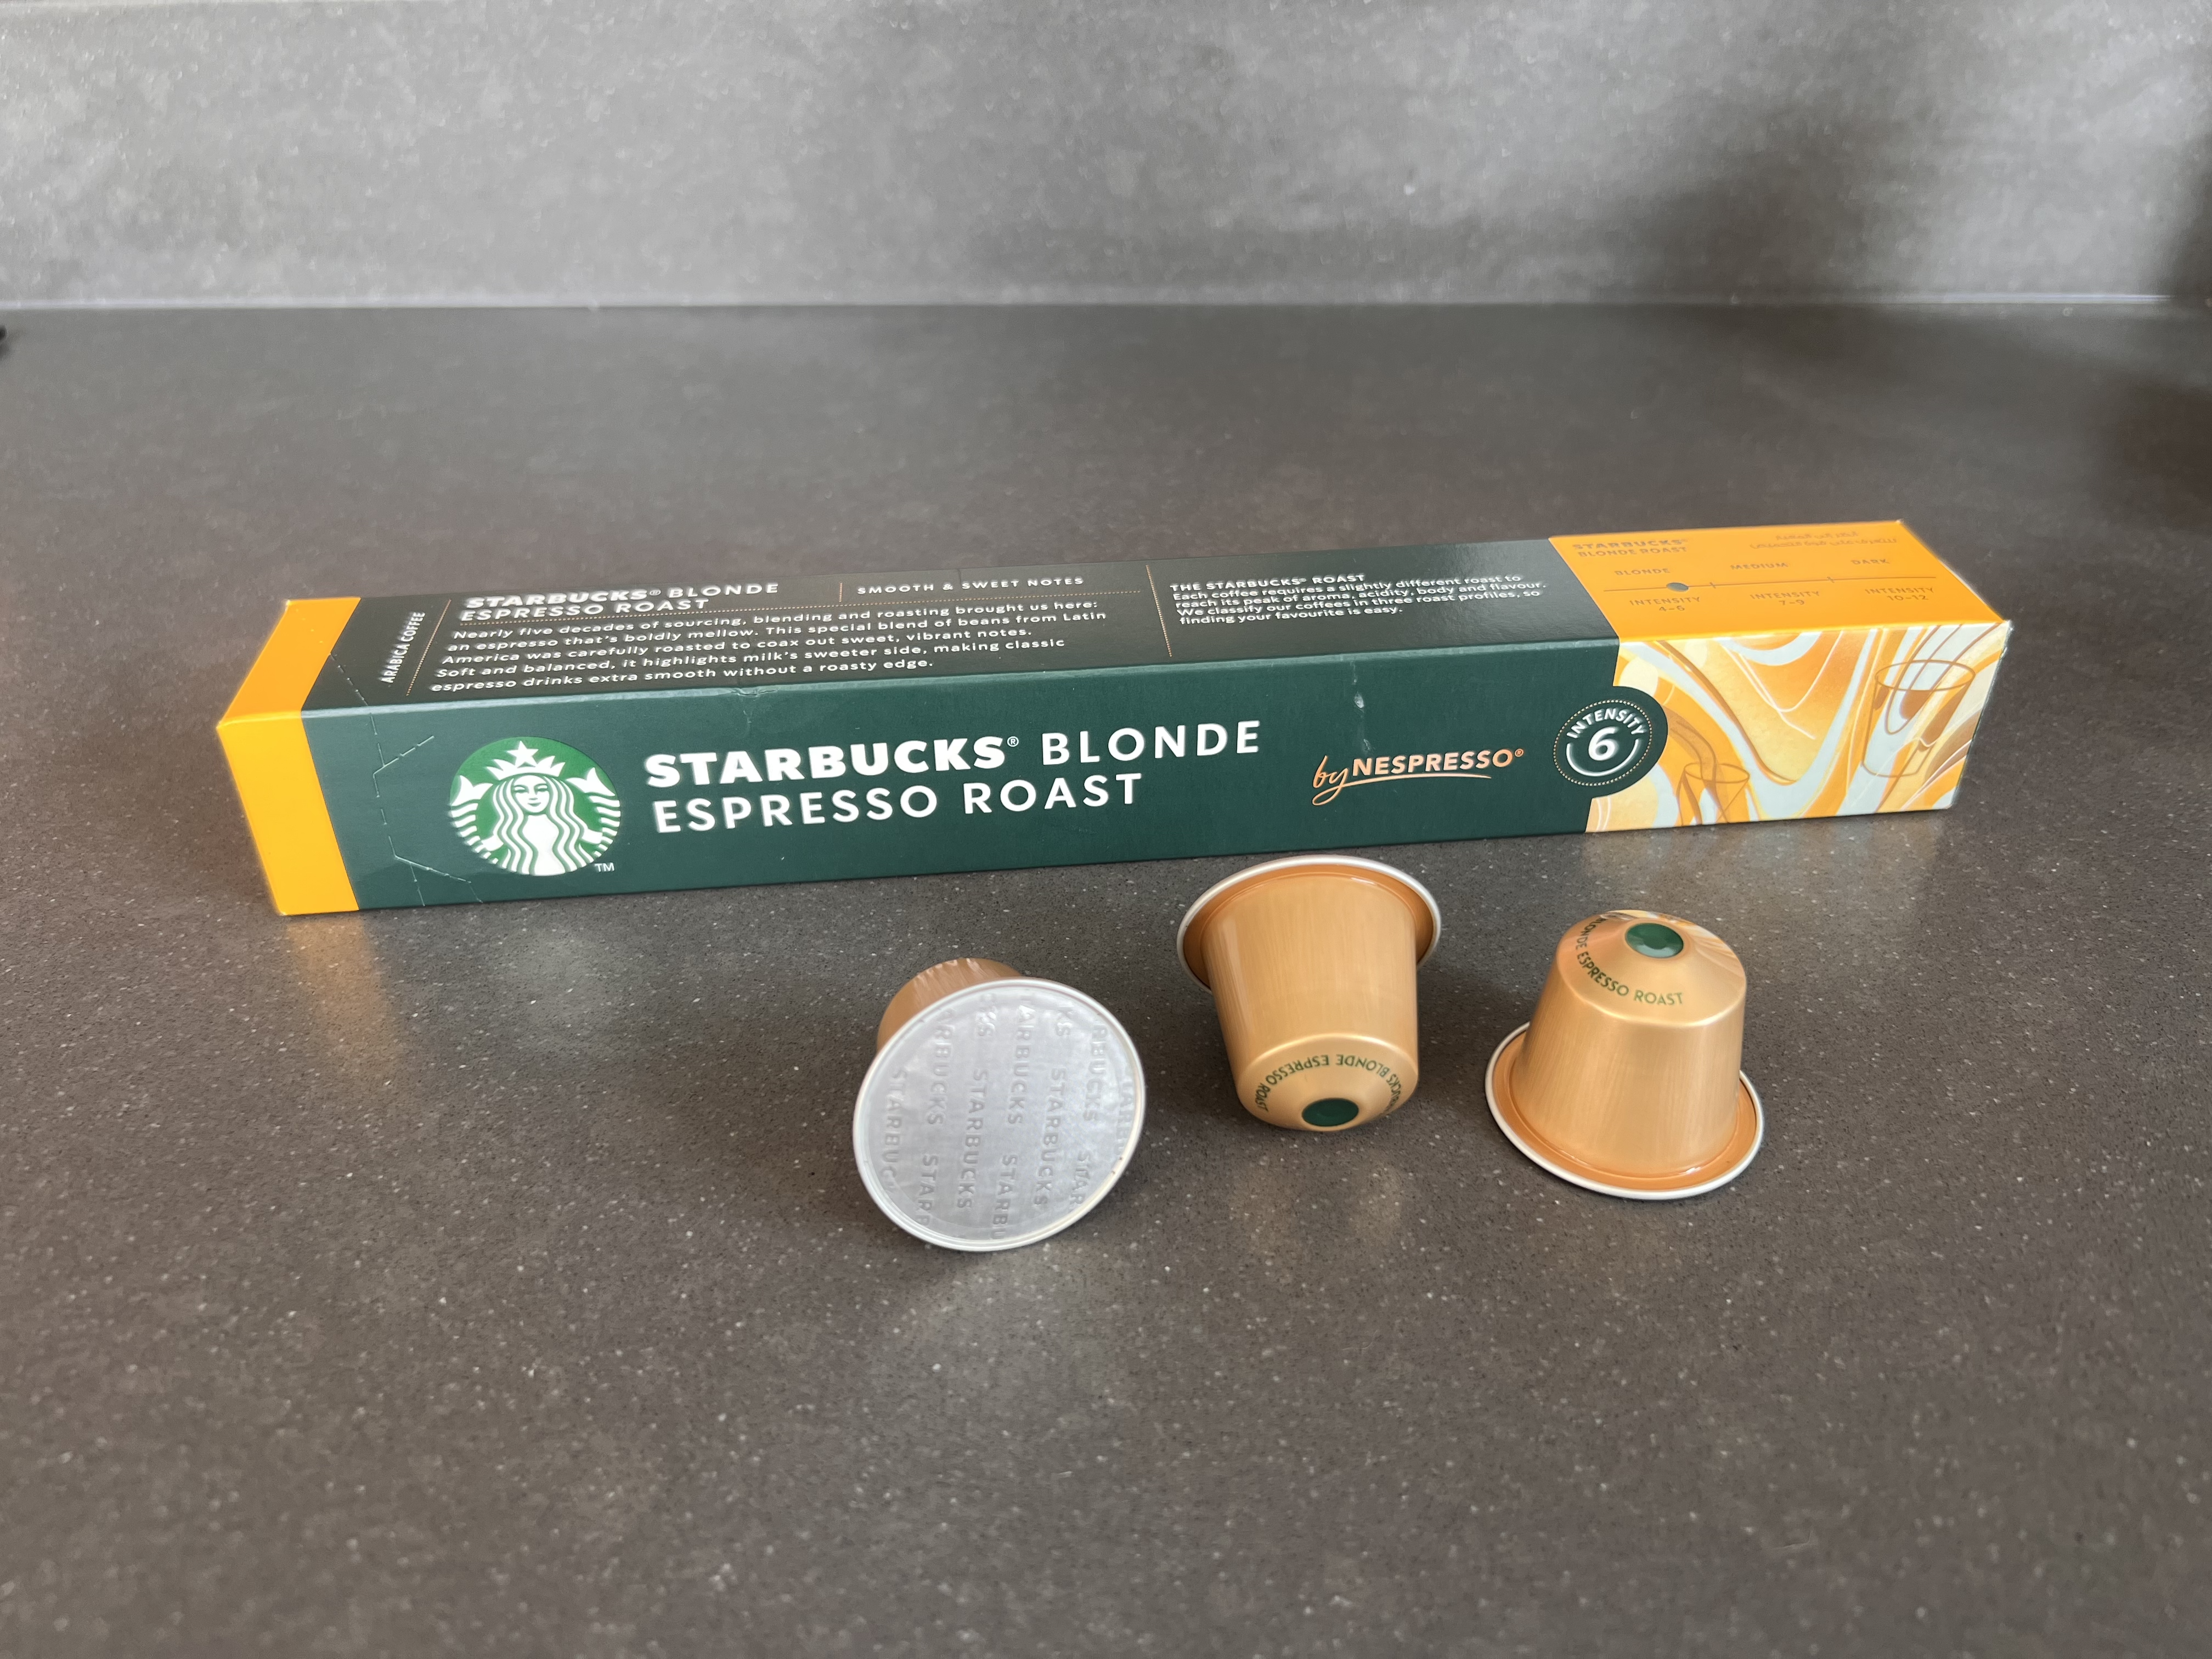 Starbucks joins forces with Podback for coffee pod recycling